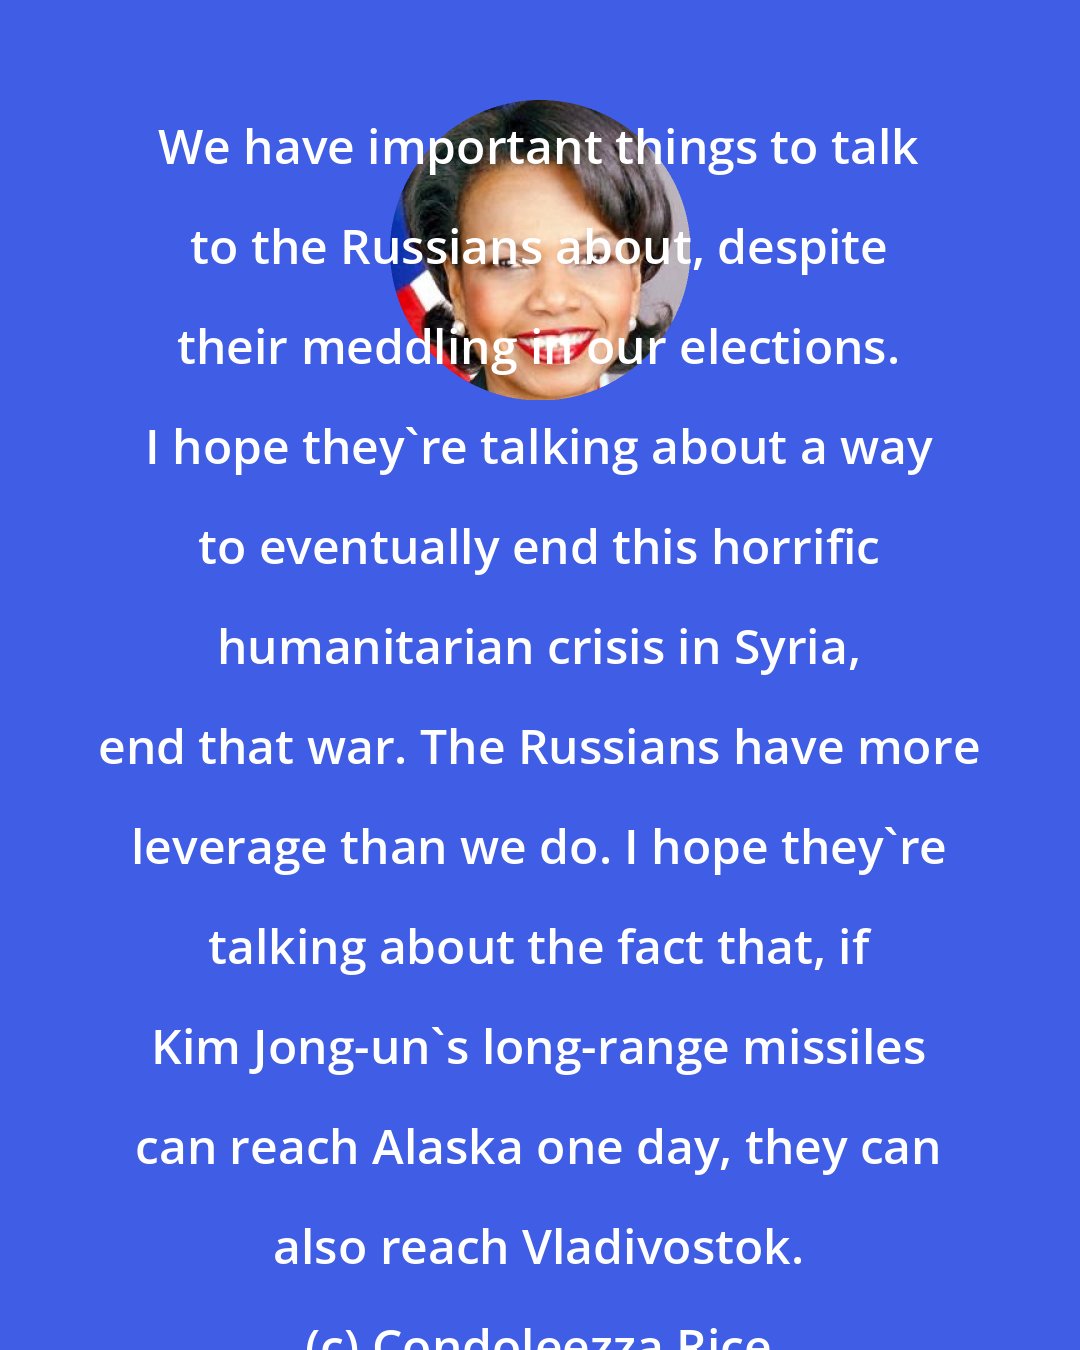 Condoleezza Rice: We have important things to talk to the Russians about, despite their meddling in our elections. I hope they're talking about a way to eventually end this horrific humanitarian crisis in Syria, end that war. The Russians have more leverage than we do. I hope they're talking about the fact that, if Kim Jong-un's long-range missiles can reach Alaska one day, they can also reach Vladivostok.